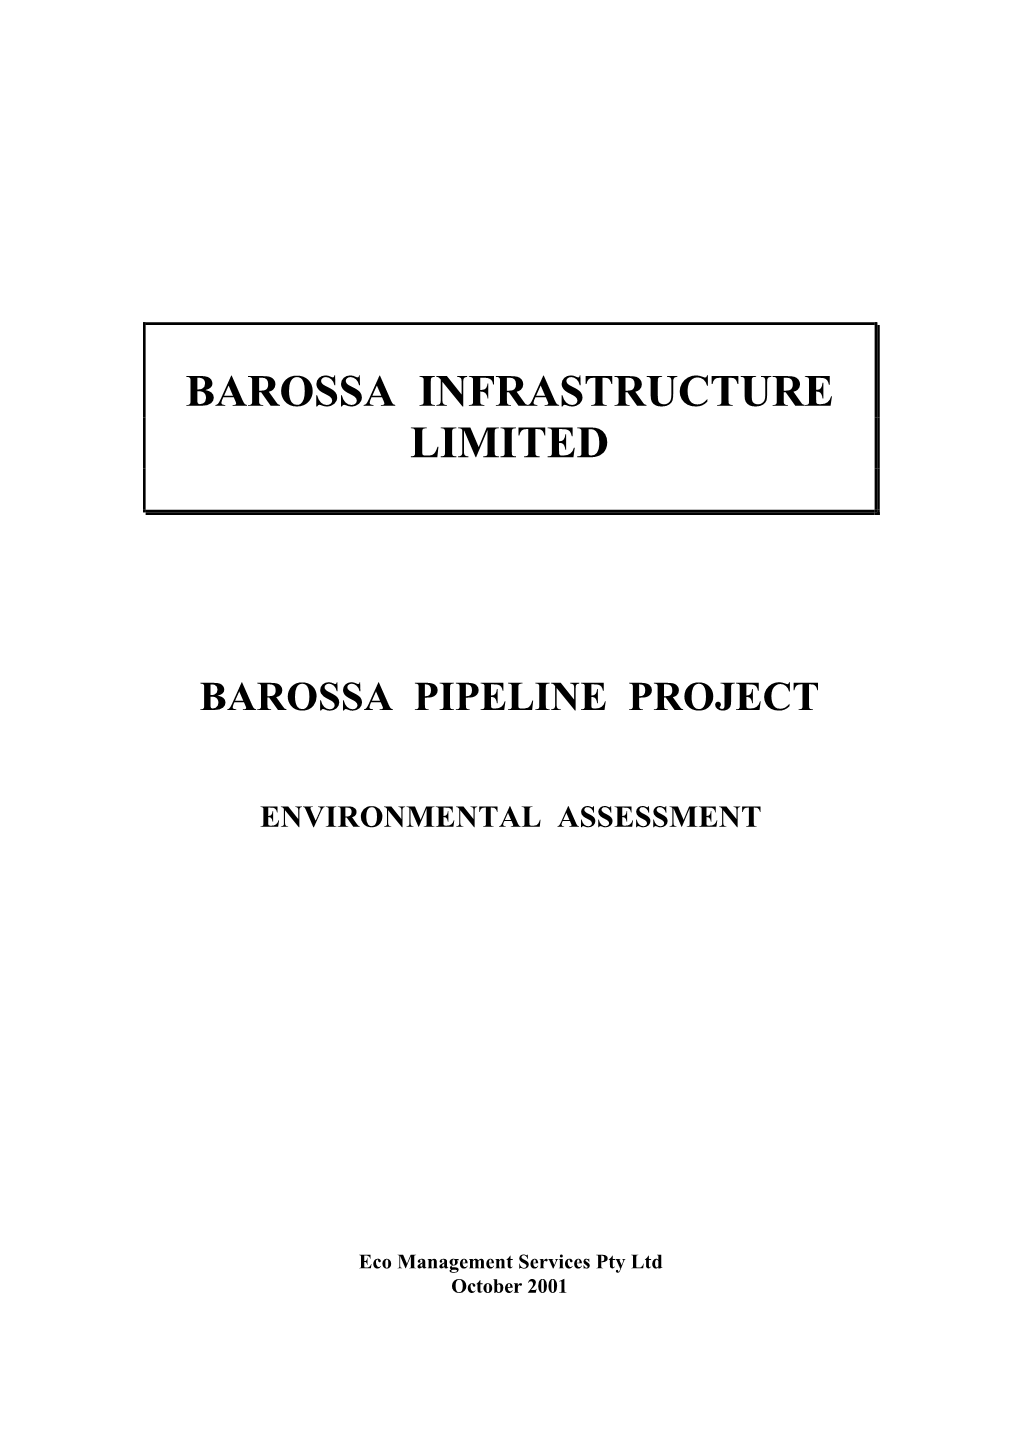 Barossa Infrastructure Limited